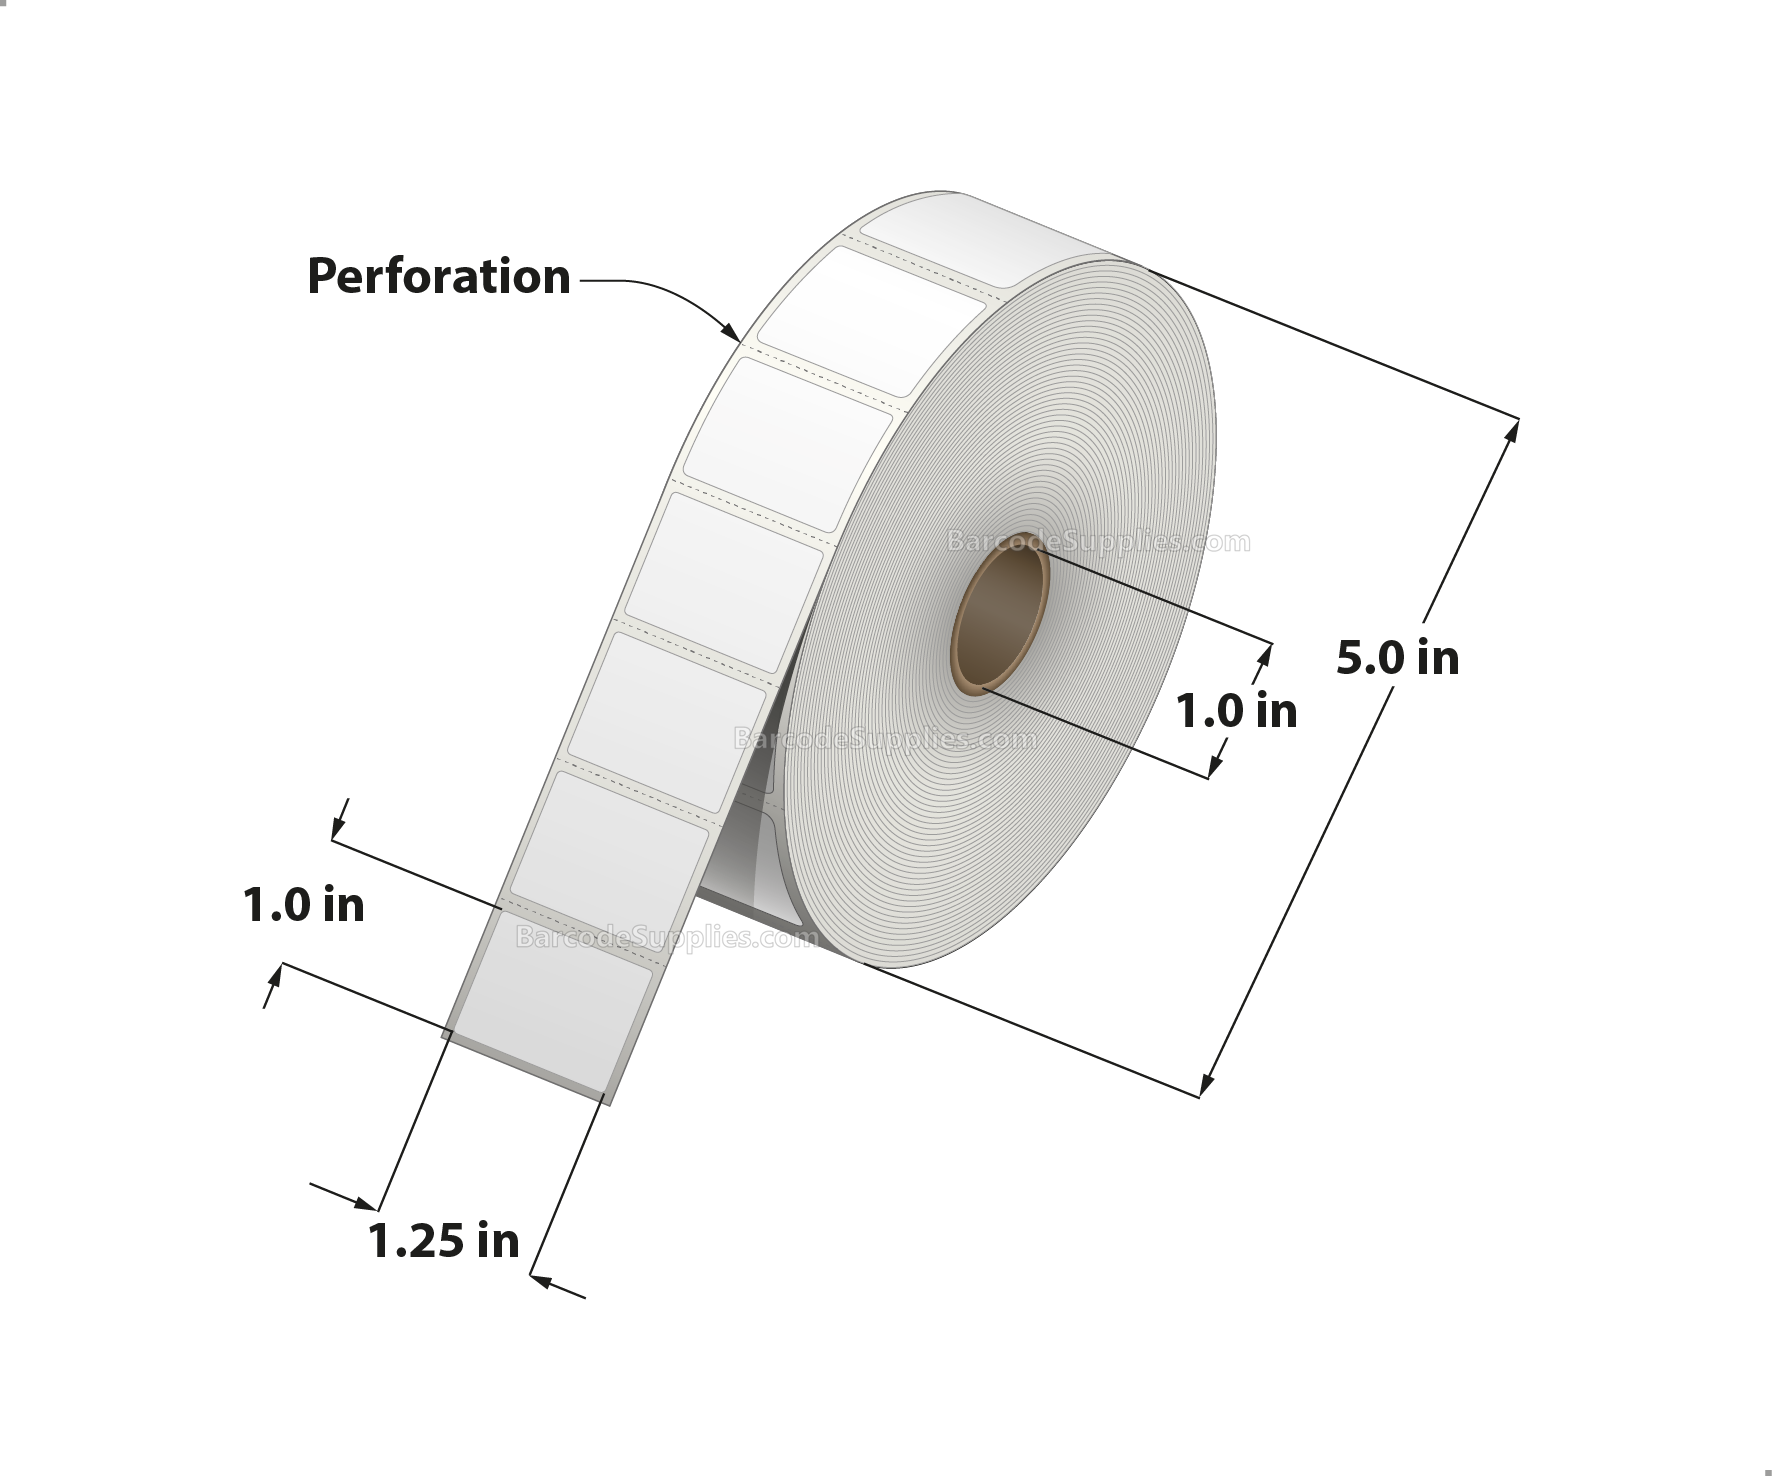 1.25 x 1 Direct Thermal White Labels With Rubber Adhesive - Perforated - 2340 Labels Per Roll - Carton Of 12 Rolls - 28080 Labels Total - MPN: RDT5-125100-1P